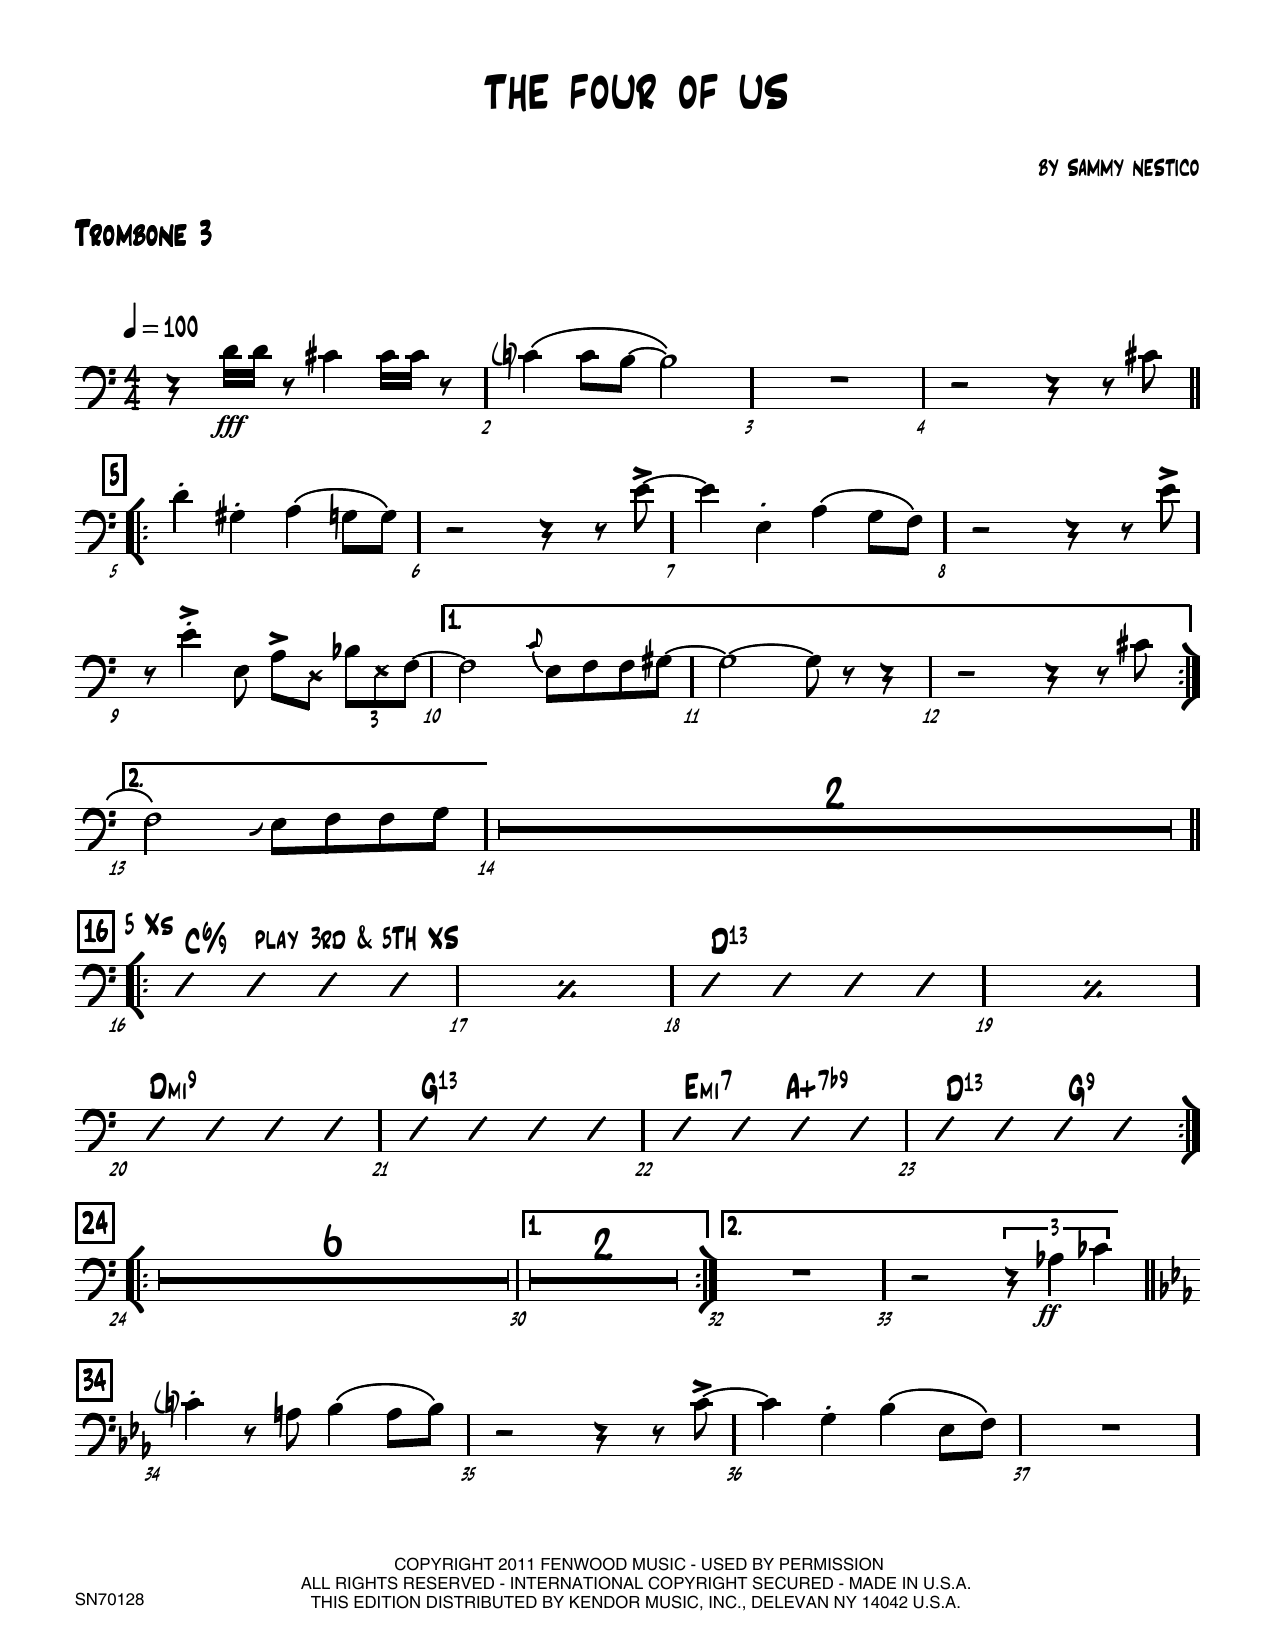 Download Sammy Nestico The Four Of Us - 3rd Trombone Sheet Music